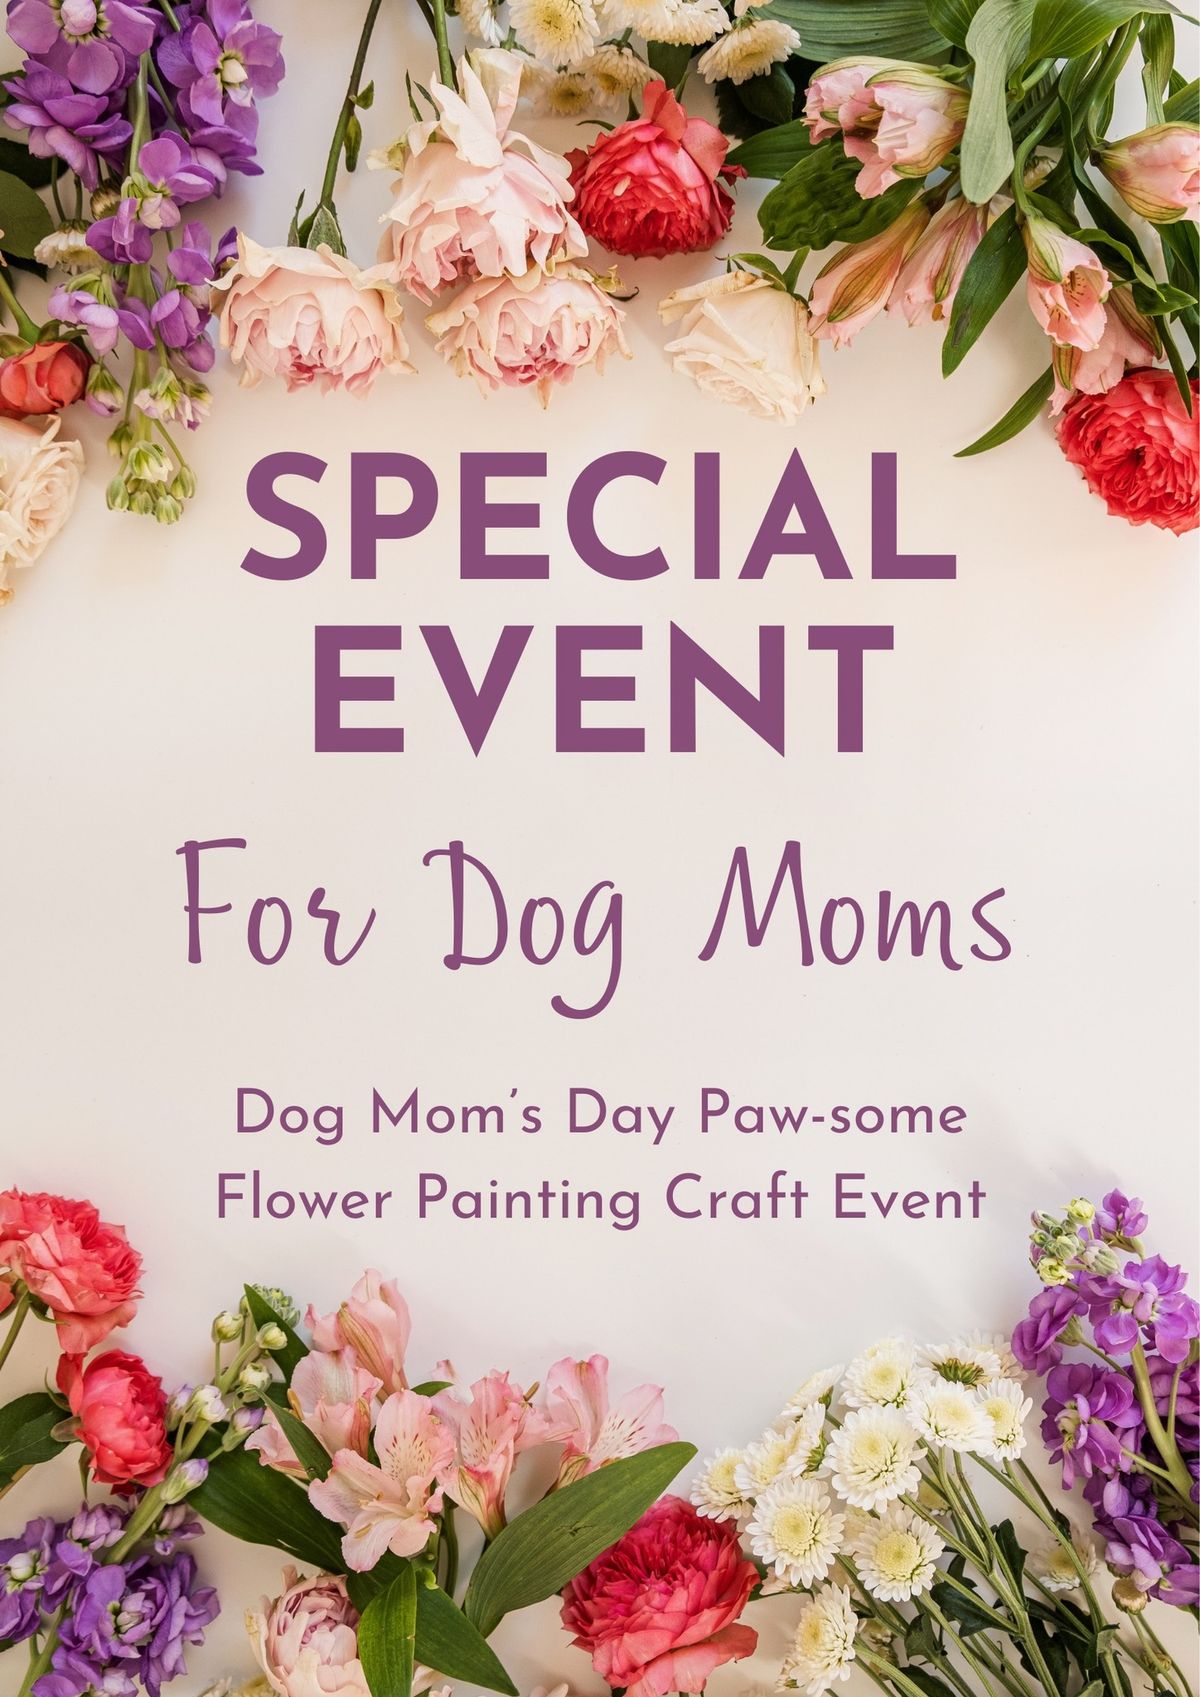 Dog Mom's Day Paw-some Flower Painting Craft